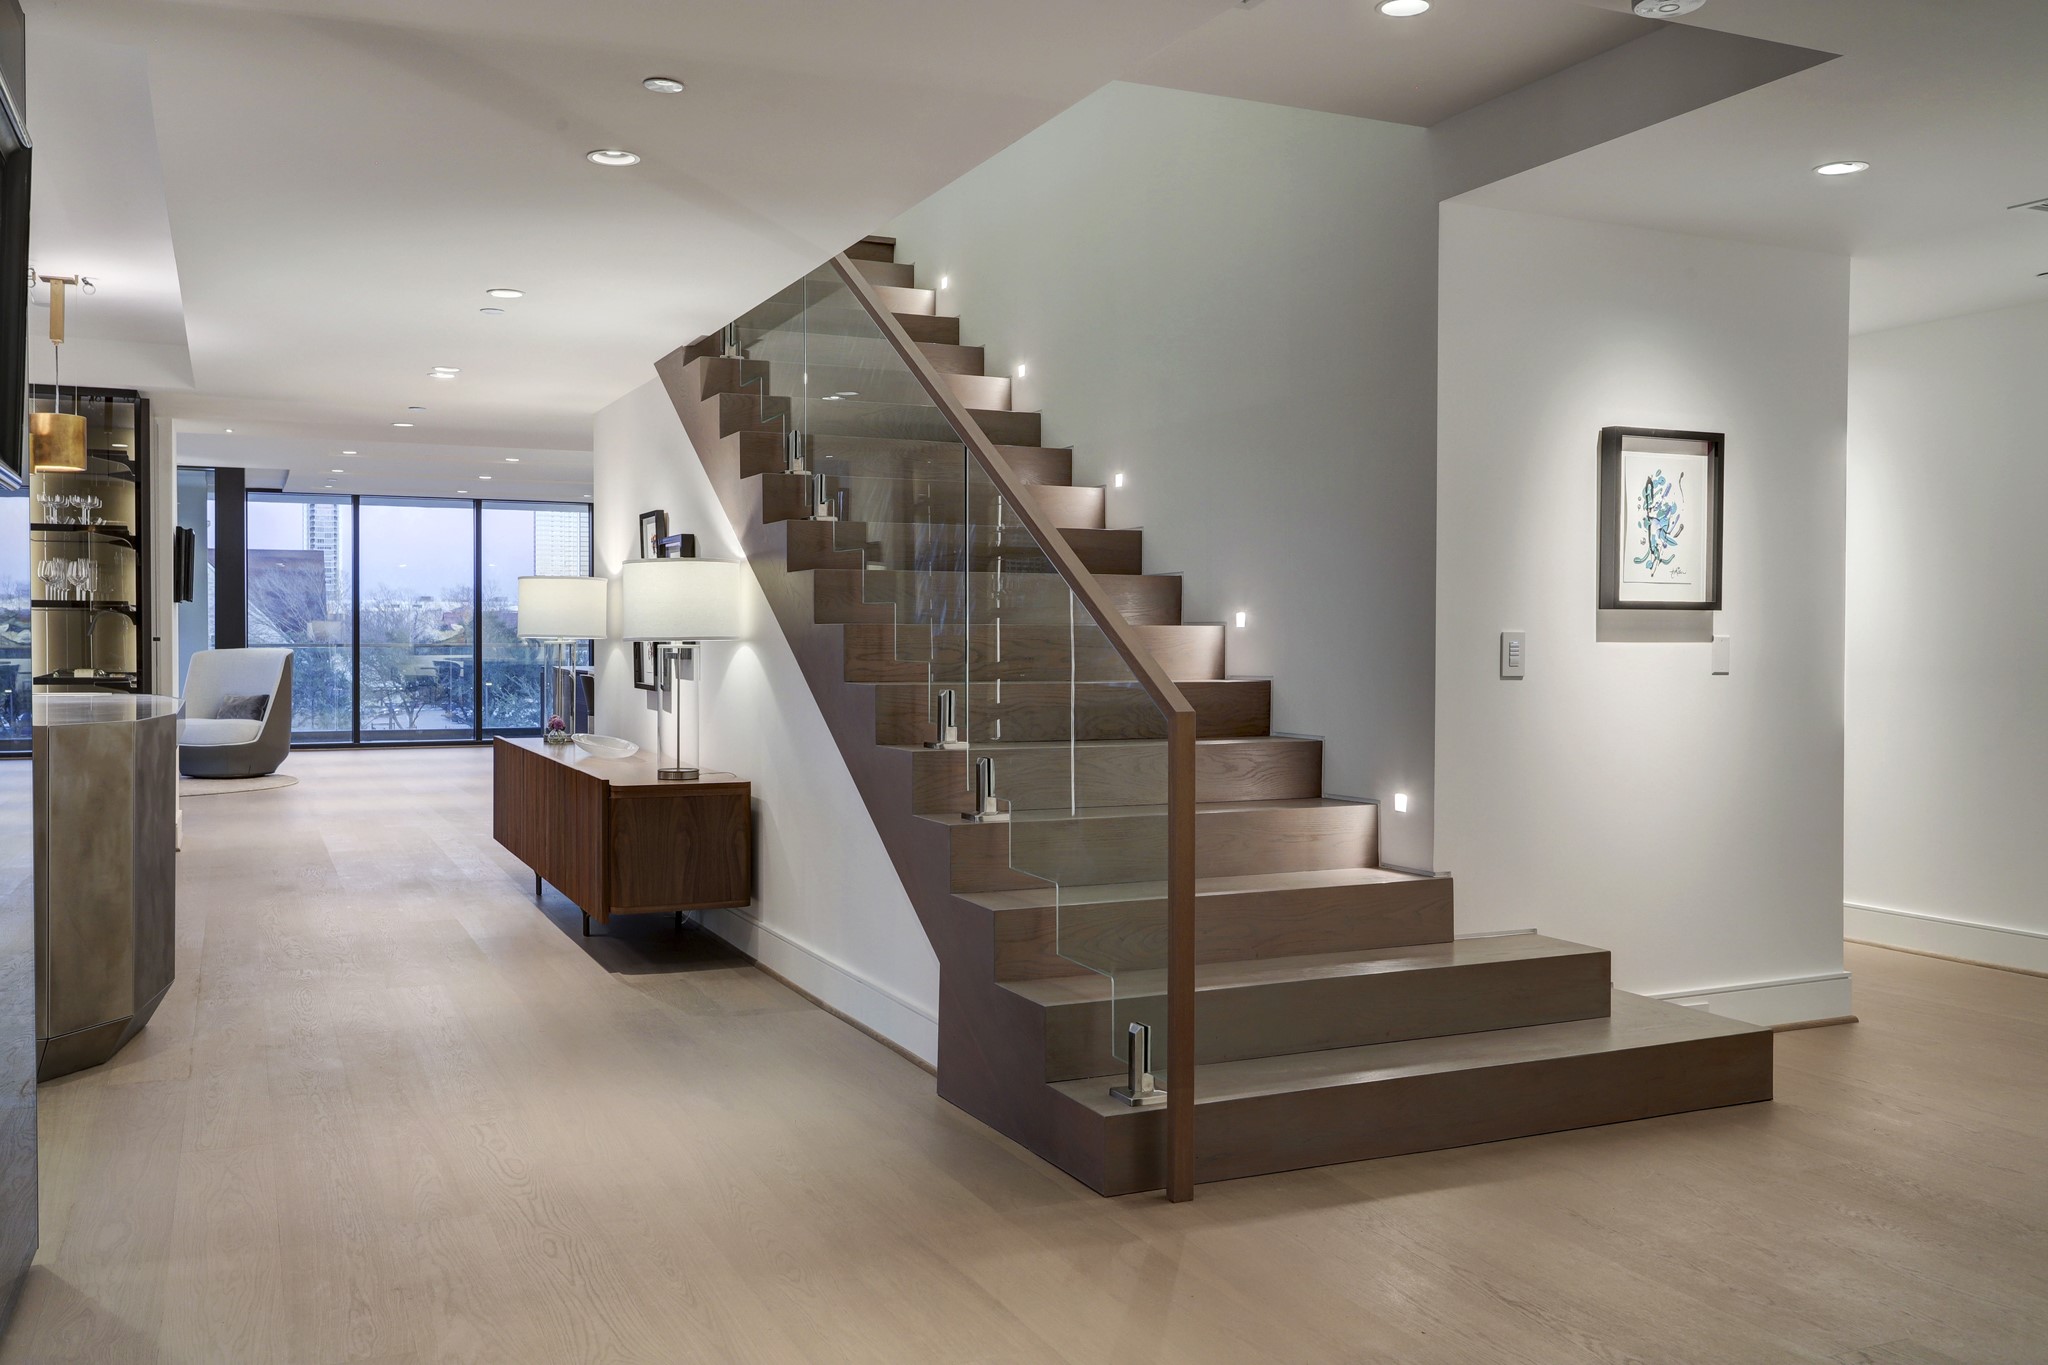 On the main floor of the 7,582-square-foot home, you're invited into sprawling open-plan living and dining areas lined with floor-to-ceiling windows and unimpeded open-sky views. The staircase shown here is a true work of art.